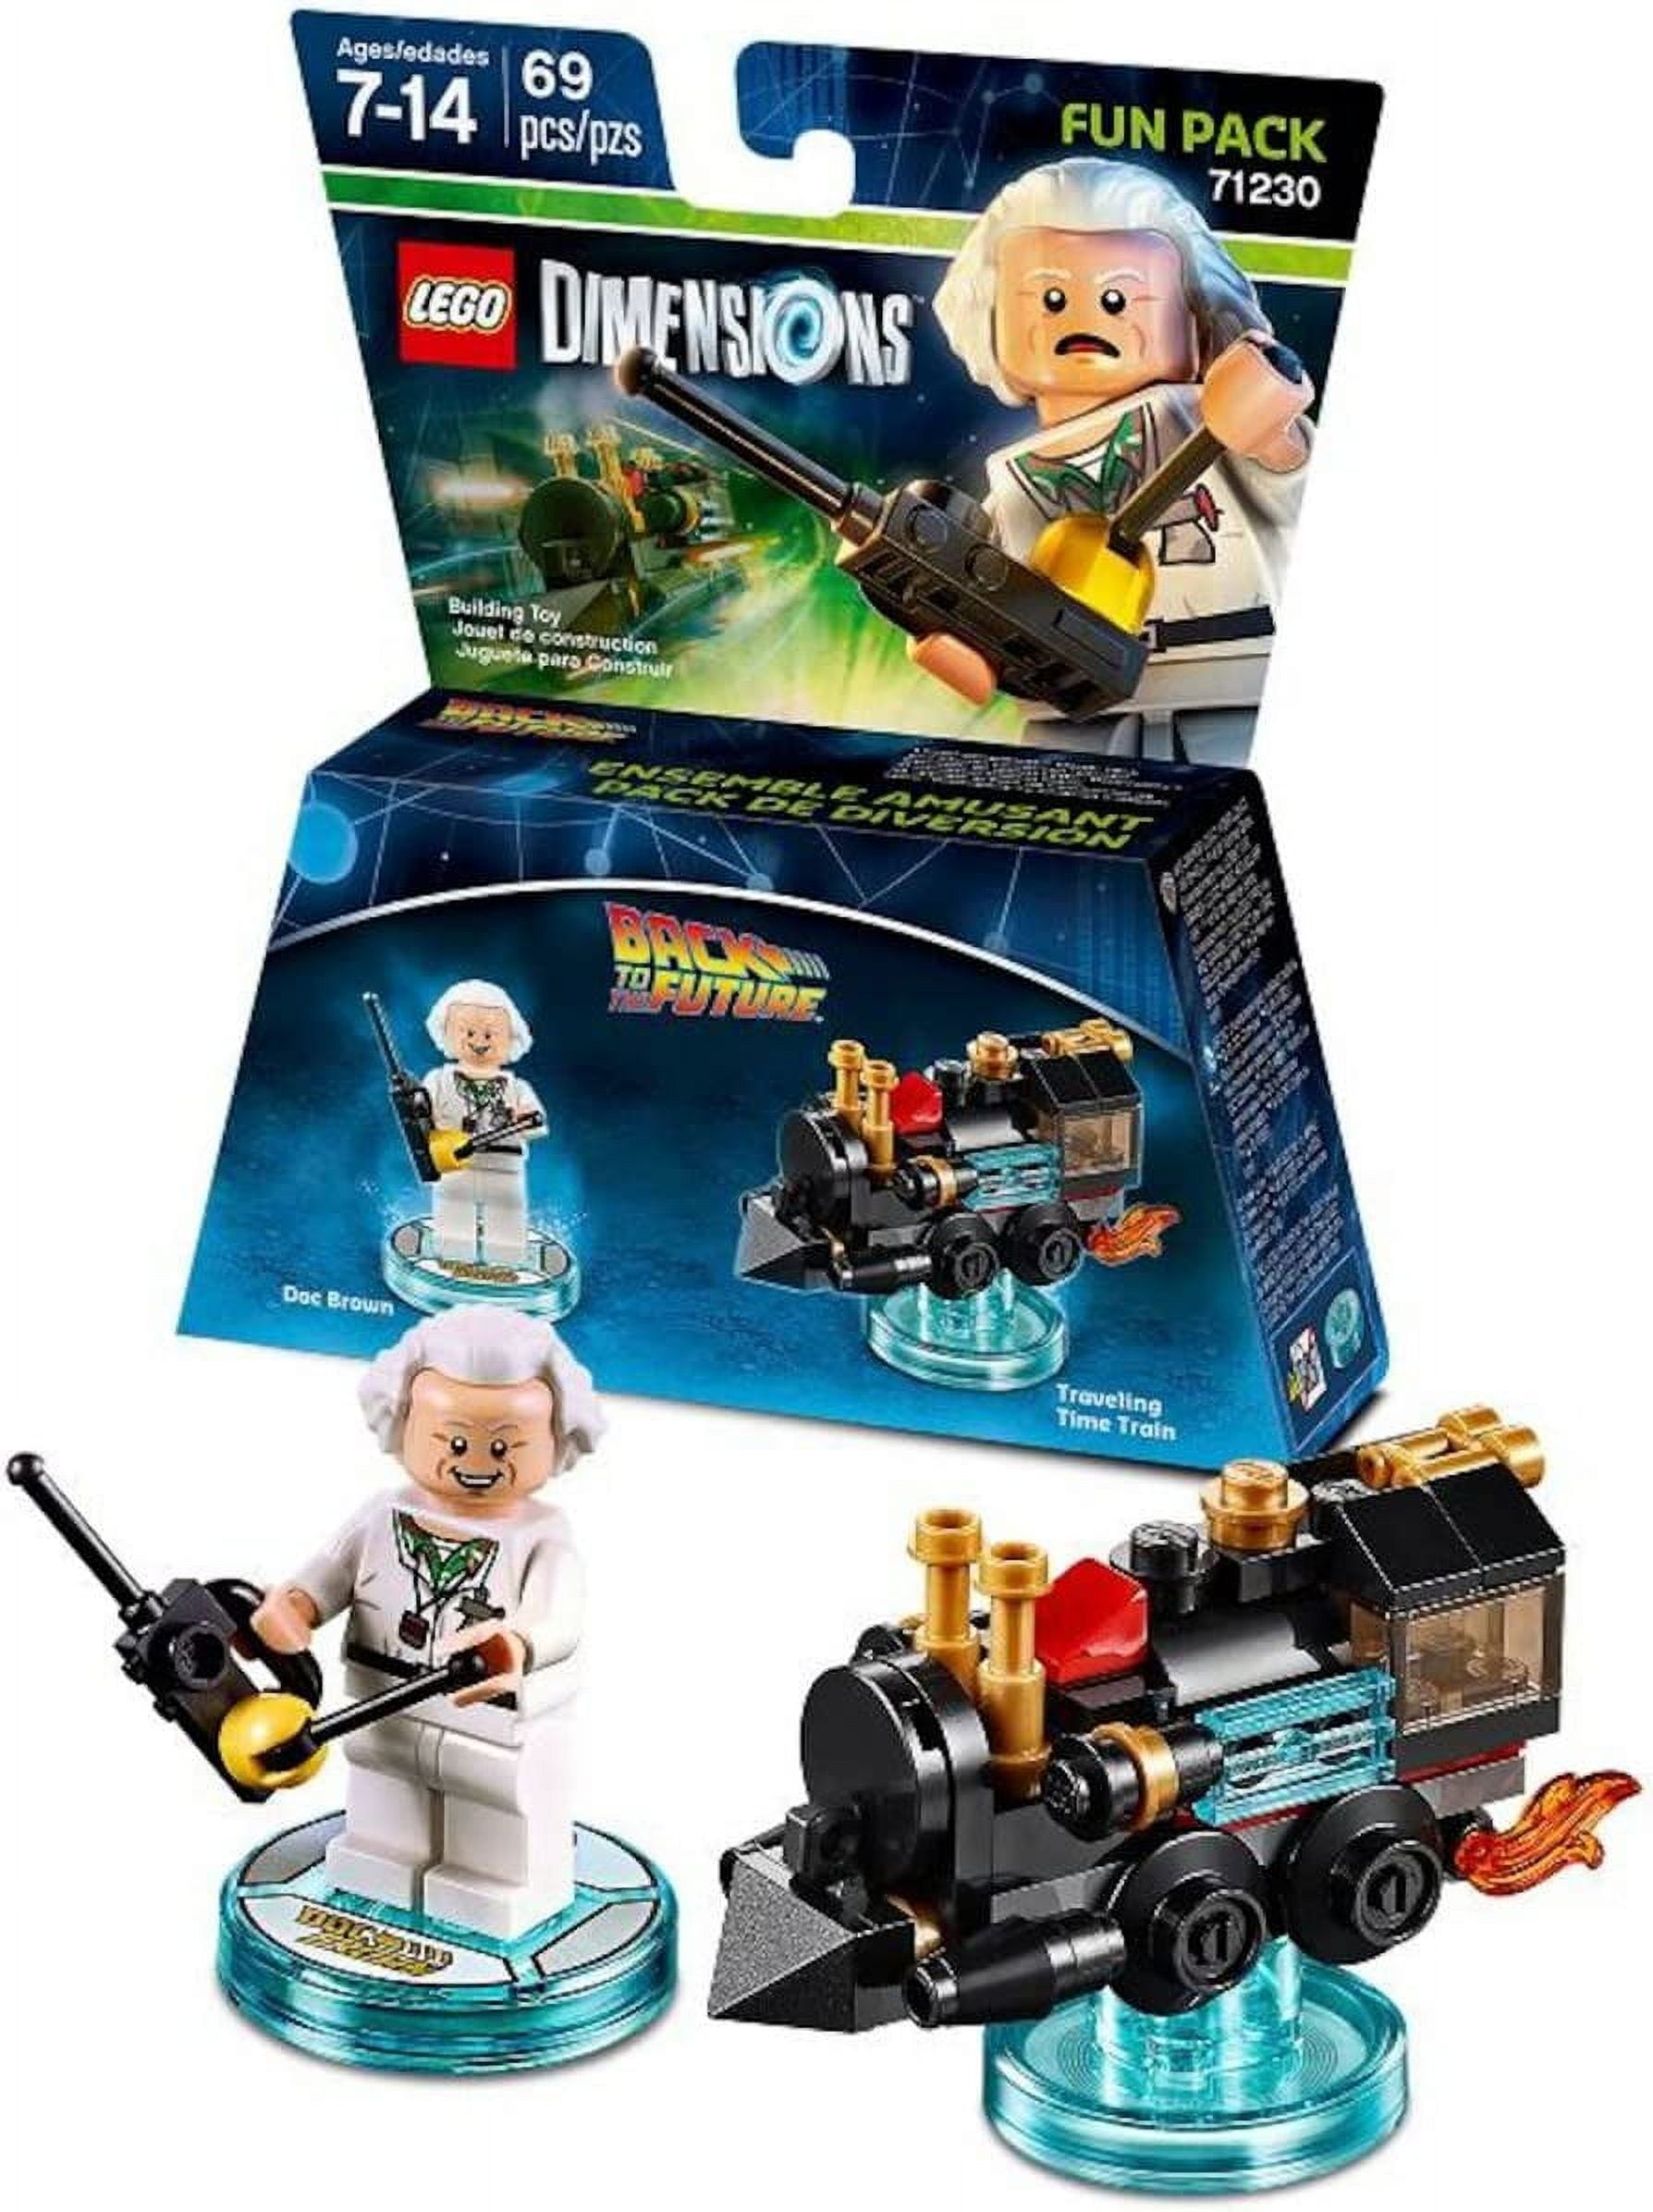 Back to the Future Doc Brown Fun Pack - LEGO Dimensions 